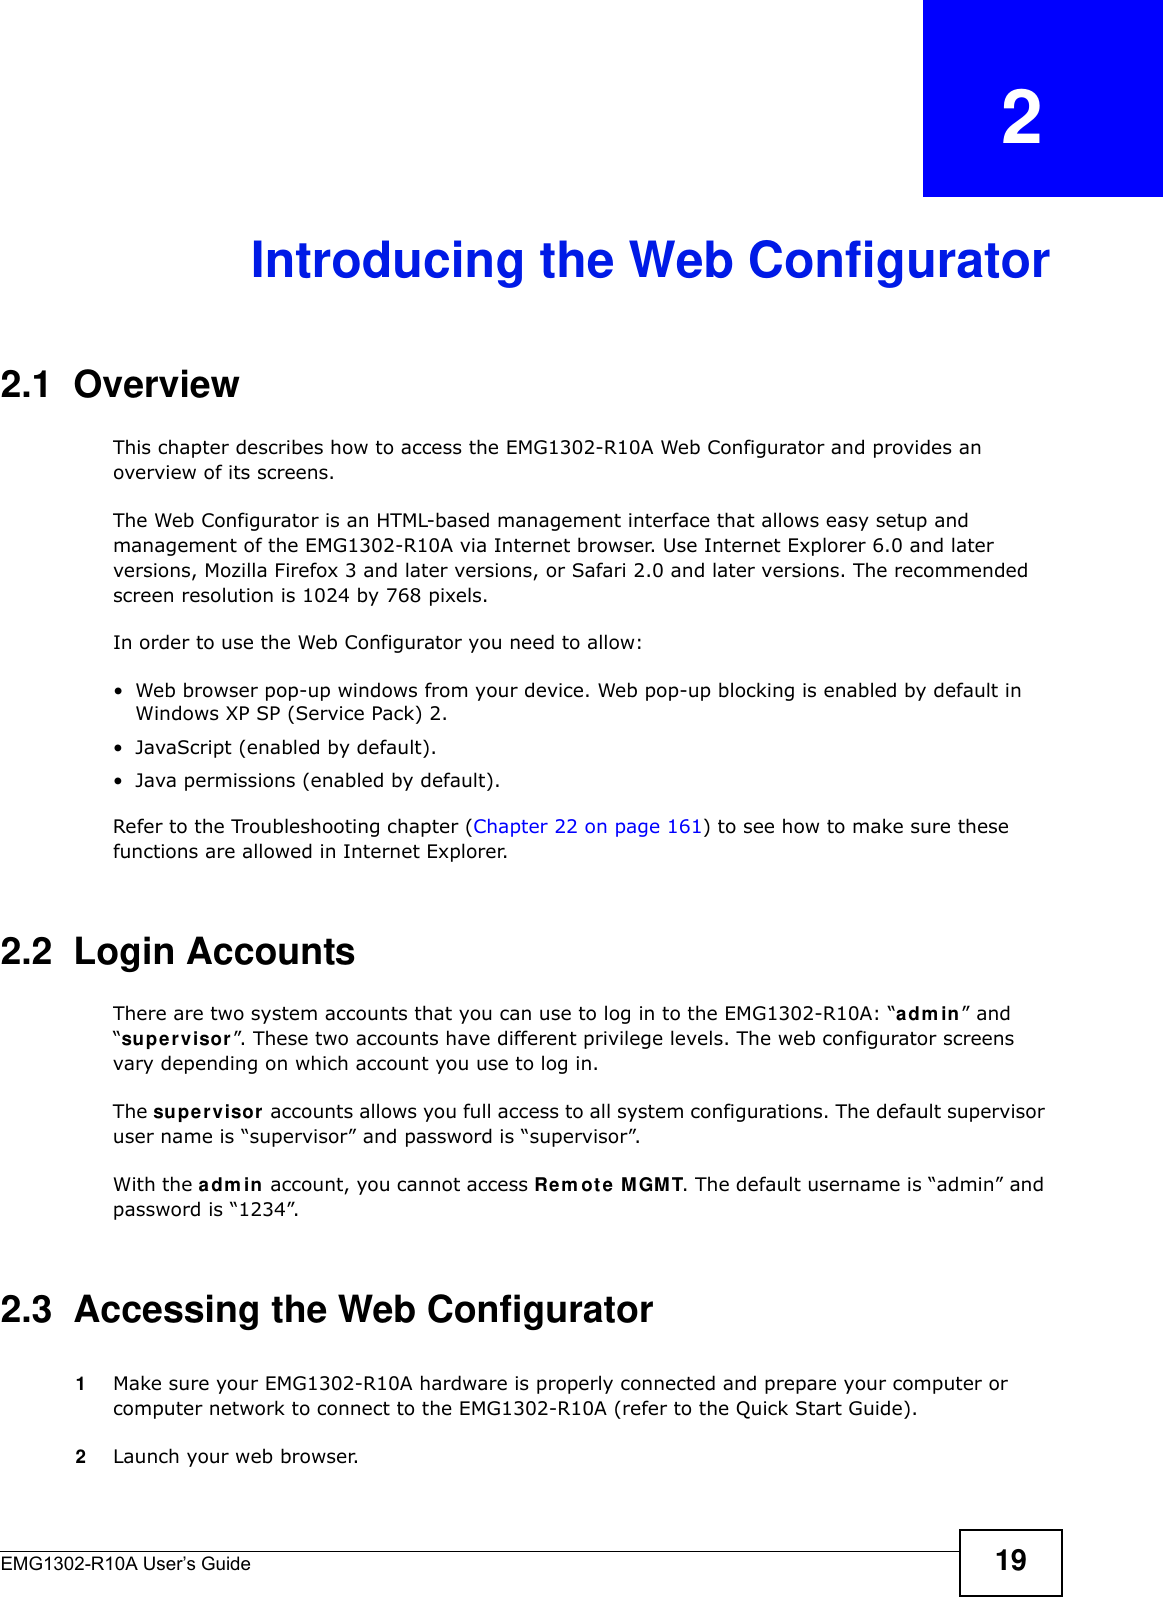 EMG1302-R10A User’s Guide 19CHAPTER   2Introducing the Web Configurator2.1  OverviewThis chapter describes how to access the EMG1302-R10A Web Configurator and provides an overview of its screens.The Web Configurator is an HTML-based management interface that allows easy setup and management of the EMG1302-R10A via Internet browser. Use Internet Explorer 6.0 and later versions, Mozilla Firefox 3 and later versions, or Safari 2.0 and later versions. The recommended screen resolution is 1024 by 768 pixels.In order to use the Web Configurator you need to allow:• Web browser pop-up windows from your device. Web pop-up blocking is enabled by default in Windows XP SP (Service Pack) 2.• JavaScript (enabled by default).• Java permissions (enabled by default).Refer to the Troubleshooting chapter (Chapter 22 on page 161) to see how to make sure these functions are allowed in Internet Explorer.2.2  Login AccountsThere are two system accounts that you can use to log in to the EMG1302-R10A: “adm in” and “supe r visor ”. These two accounts have different privilege levels. The web configurator screens vary depending on which account you use to log in.The supe r visor  accounts allows you full access to all system configurations. The default supervisor user name is “supervisor” and password is “supervisor”.With the adm in account, you cannot access Rem ote MGM T. The default username is “admin” and password is “1234”.2.3  Accessing the Web Configurator1Make sure your EMG1302-R10A hardware is properly connected and prepare your computer or computer network to connect to the EMG1302-R10A (refer to the Quick Start Guide).2Launch your web browser.